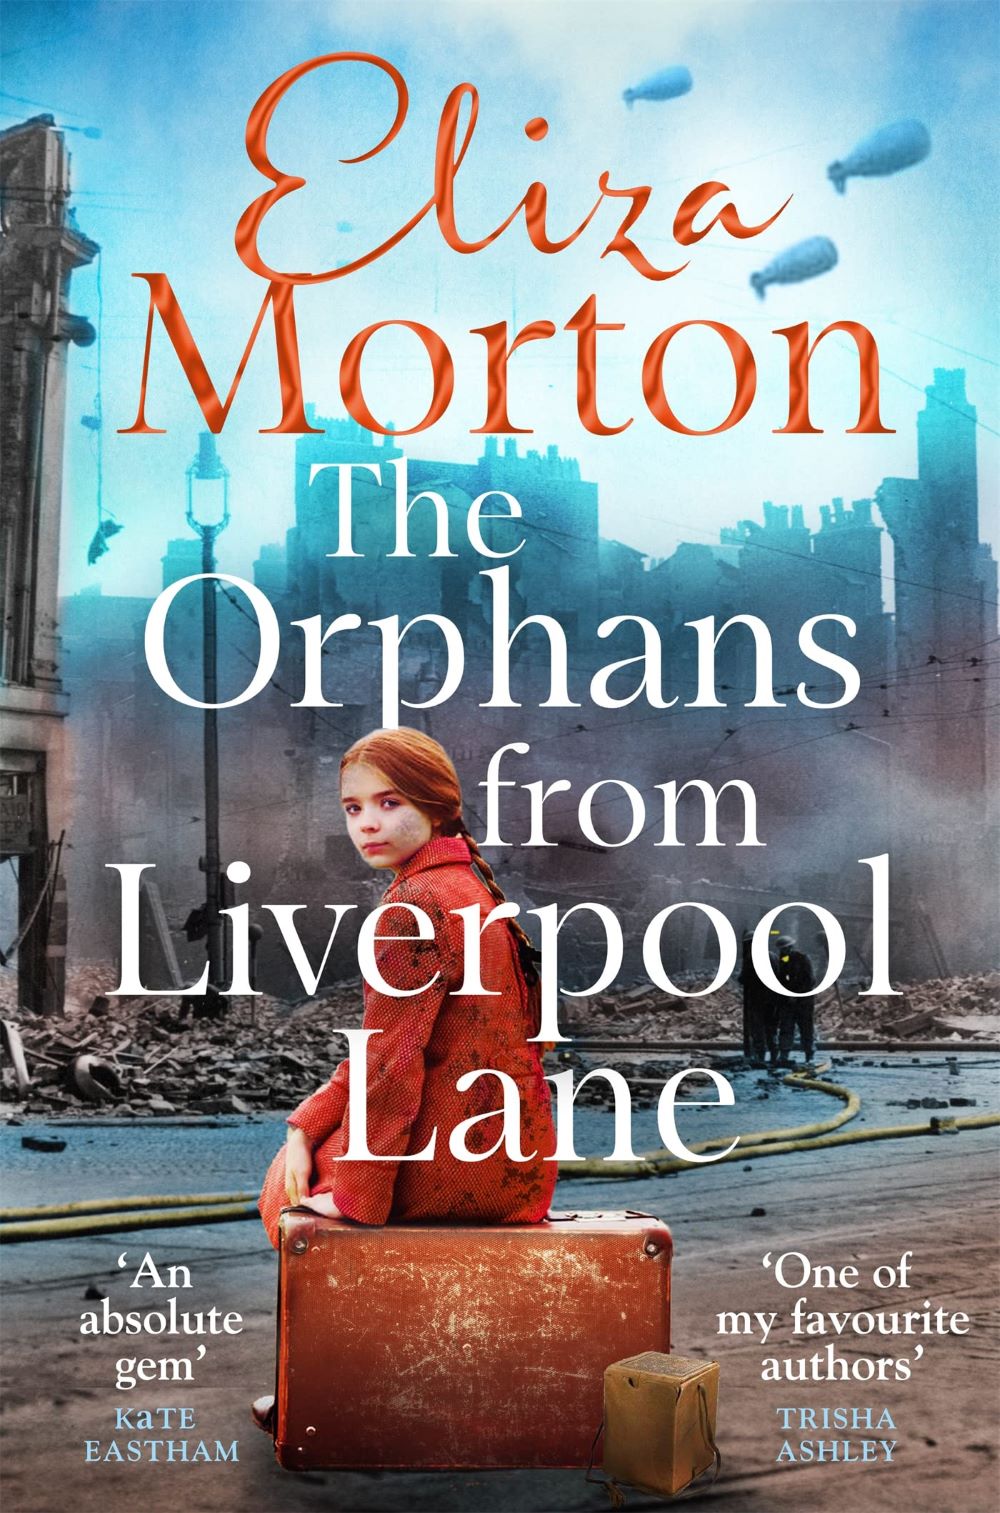 The_Orphans_from_Liverpool_Lane_book_cover